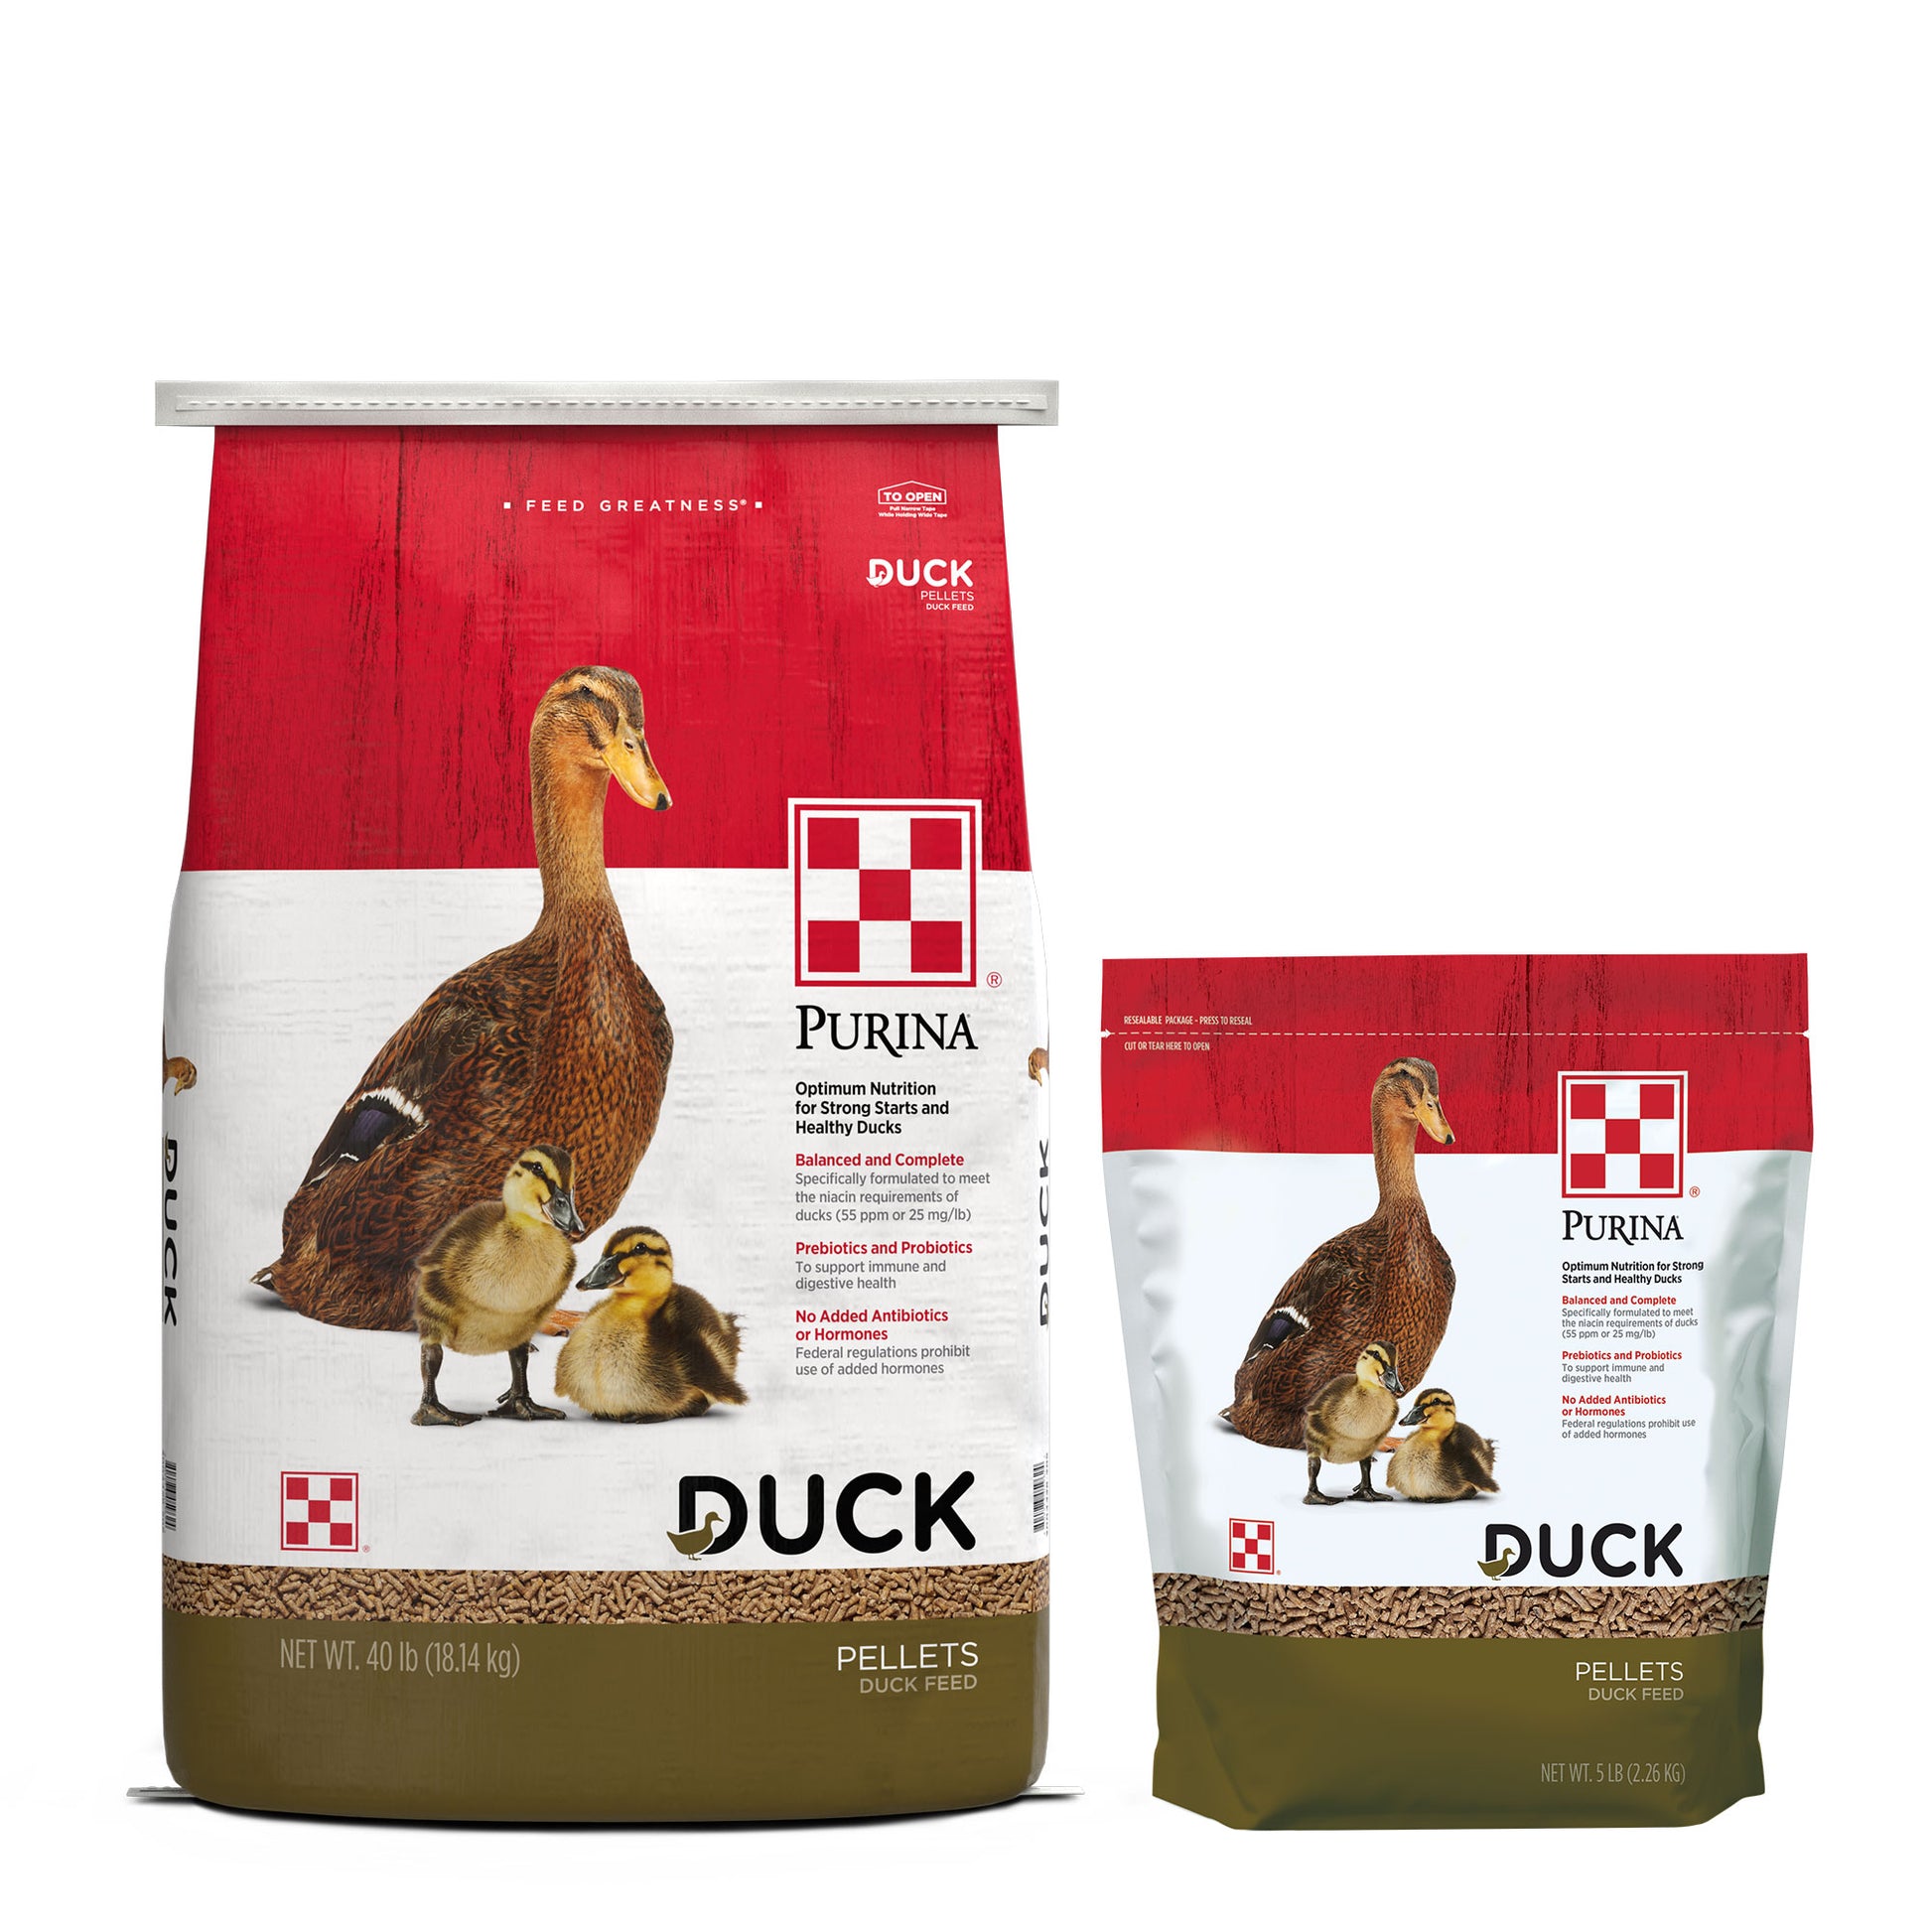 Purina Duck Feed Pellets 40 Pound Bag and the 5 Pound Pouch grouped together